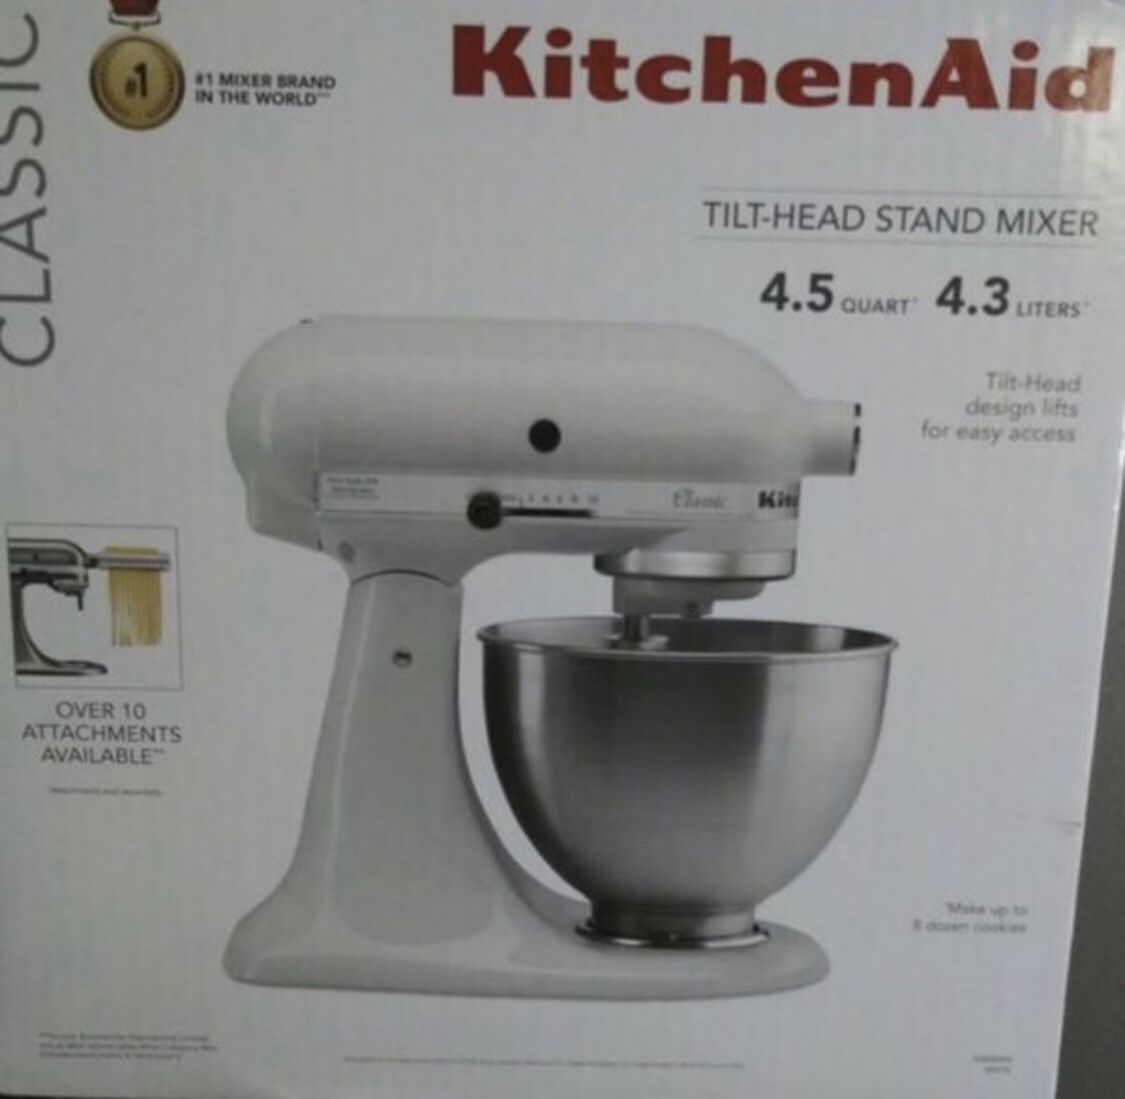 Kitchen Aid stand mixer by KitchenAid Brand New Never Opened mixer tilt head all attachments included price is Firm!!! $130 firm!!!! White